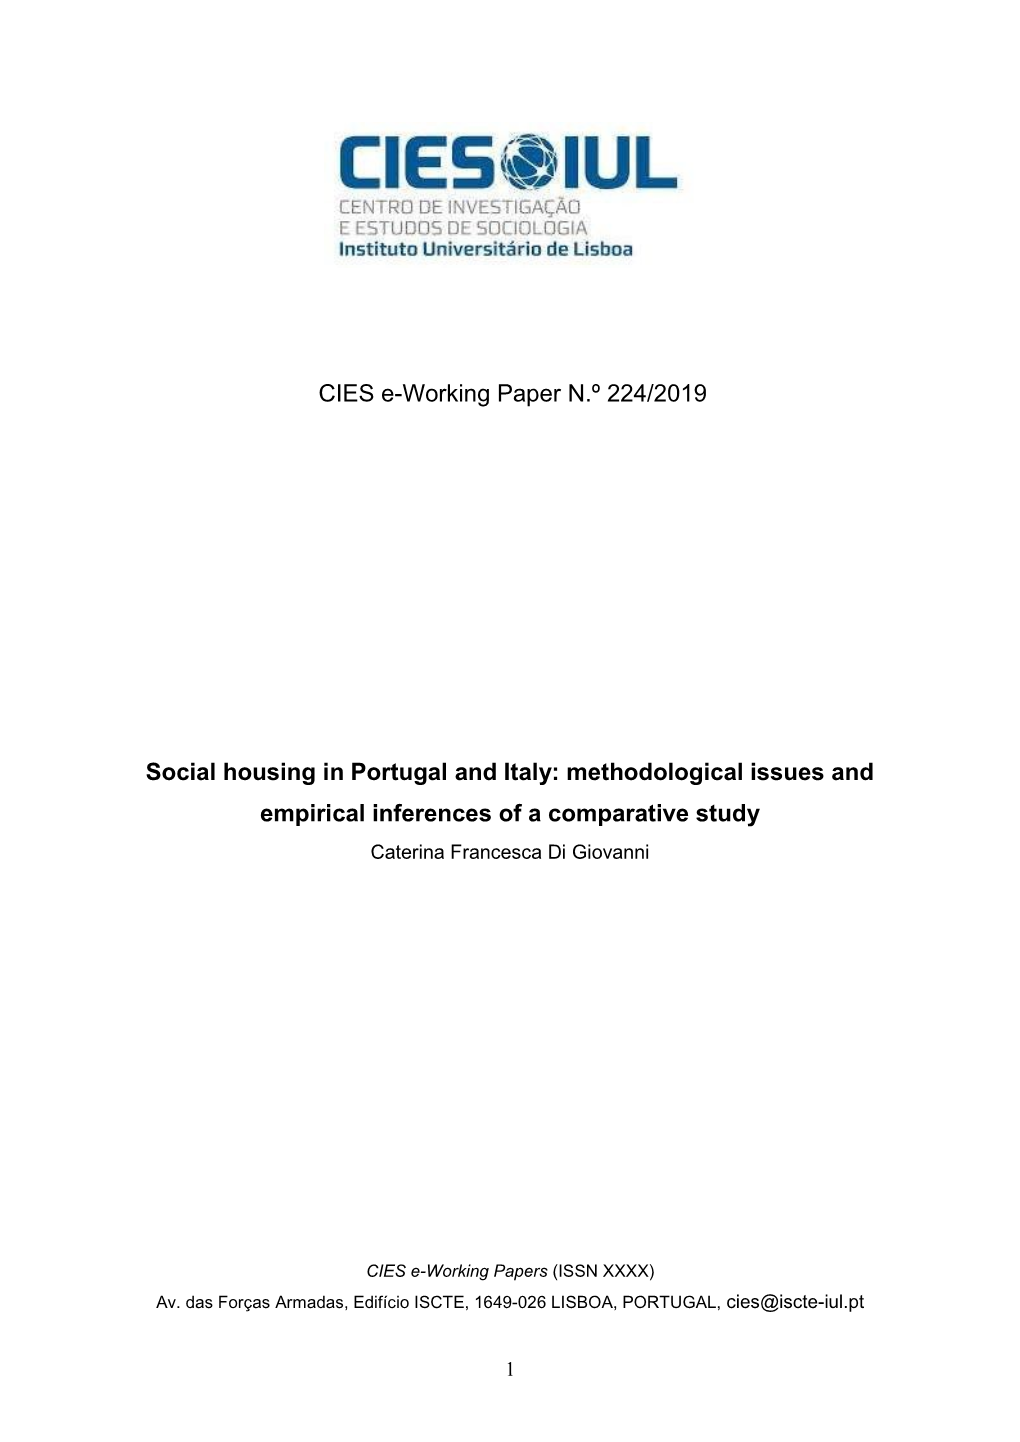 CIES E-Working Paper N.º 224/2019 Social Housing in Portugal and Italy